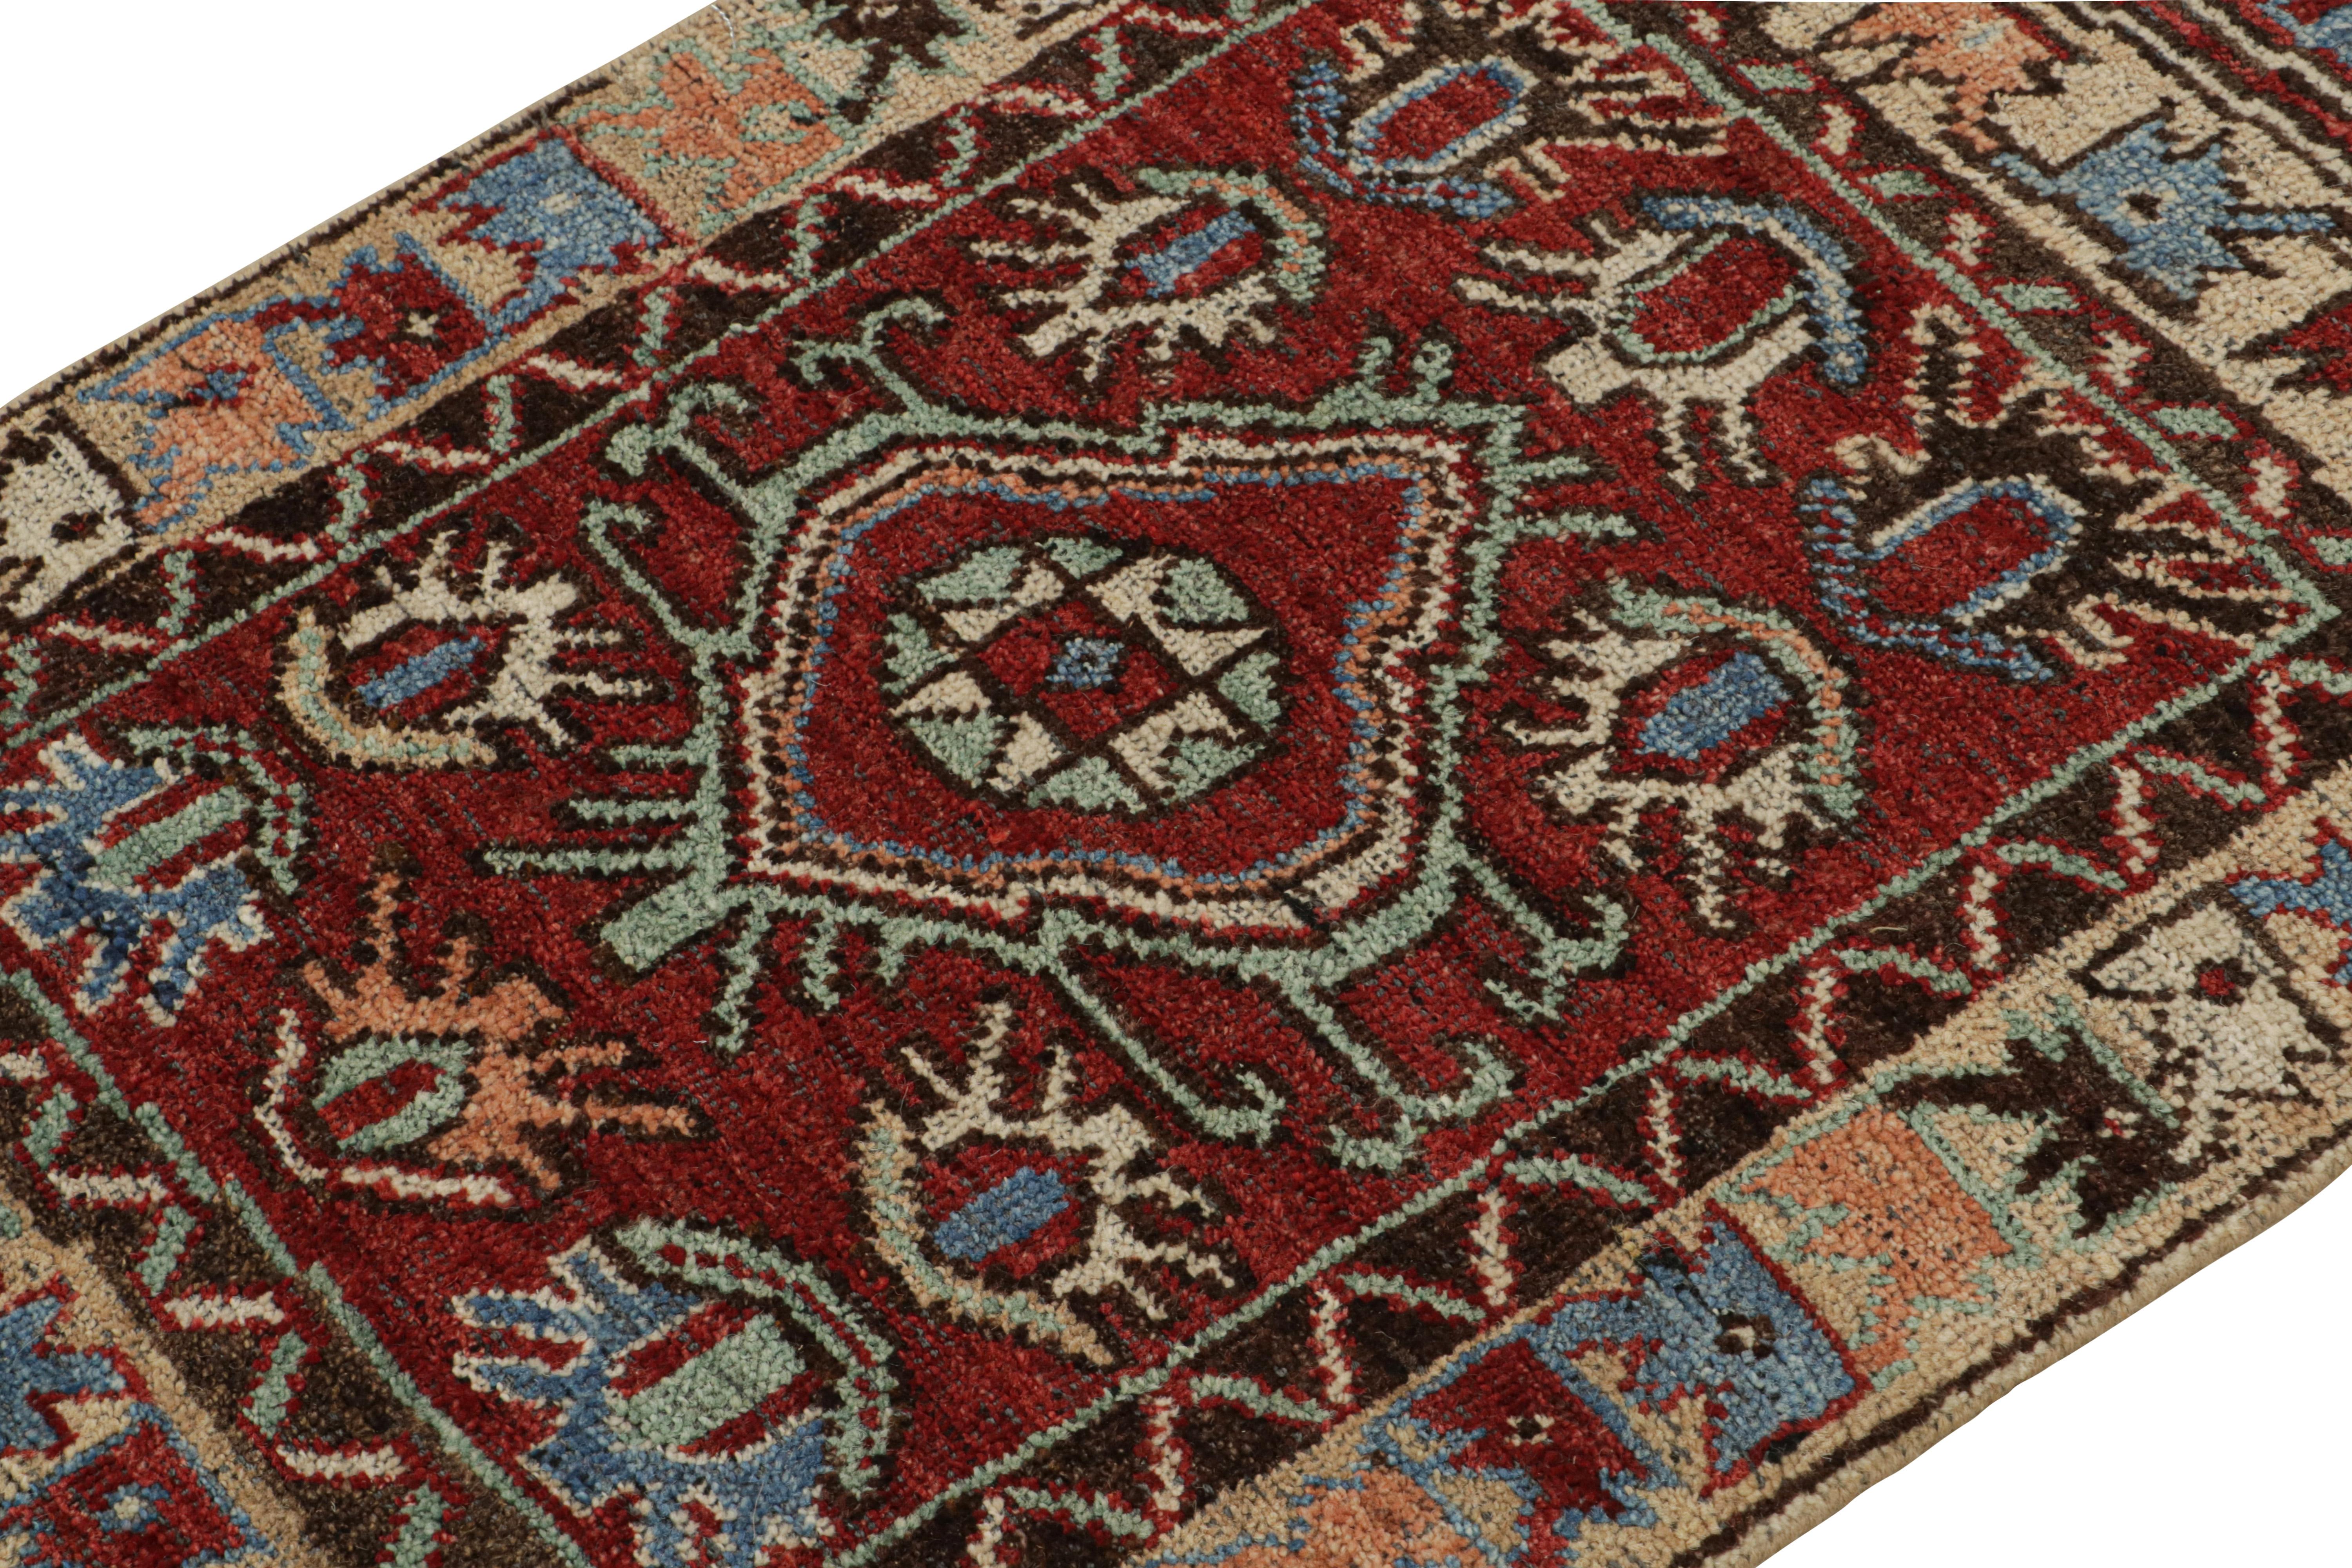 Hand-Knotted Rug & Kilim’s Antique Tribal Style Rug in Red, Blue, Green & Black Patterns For Sale